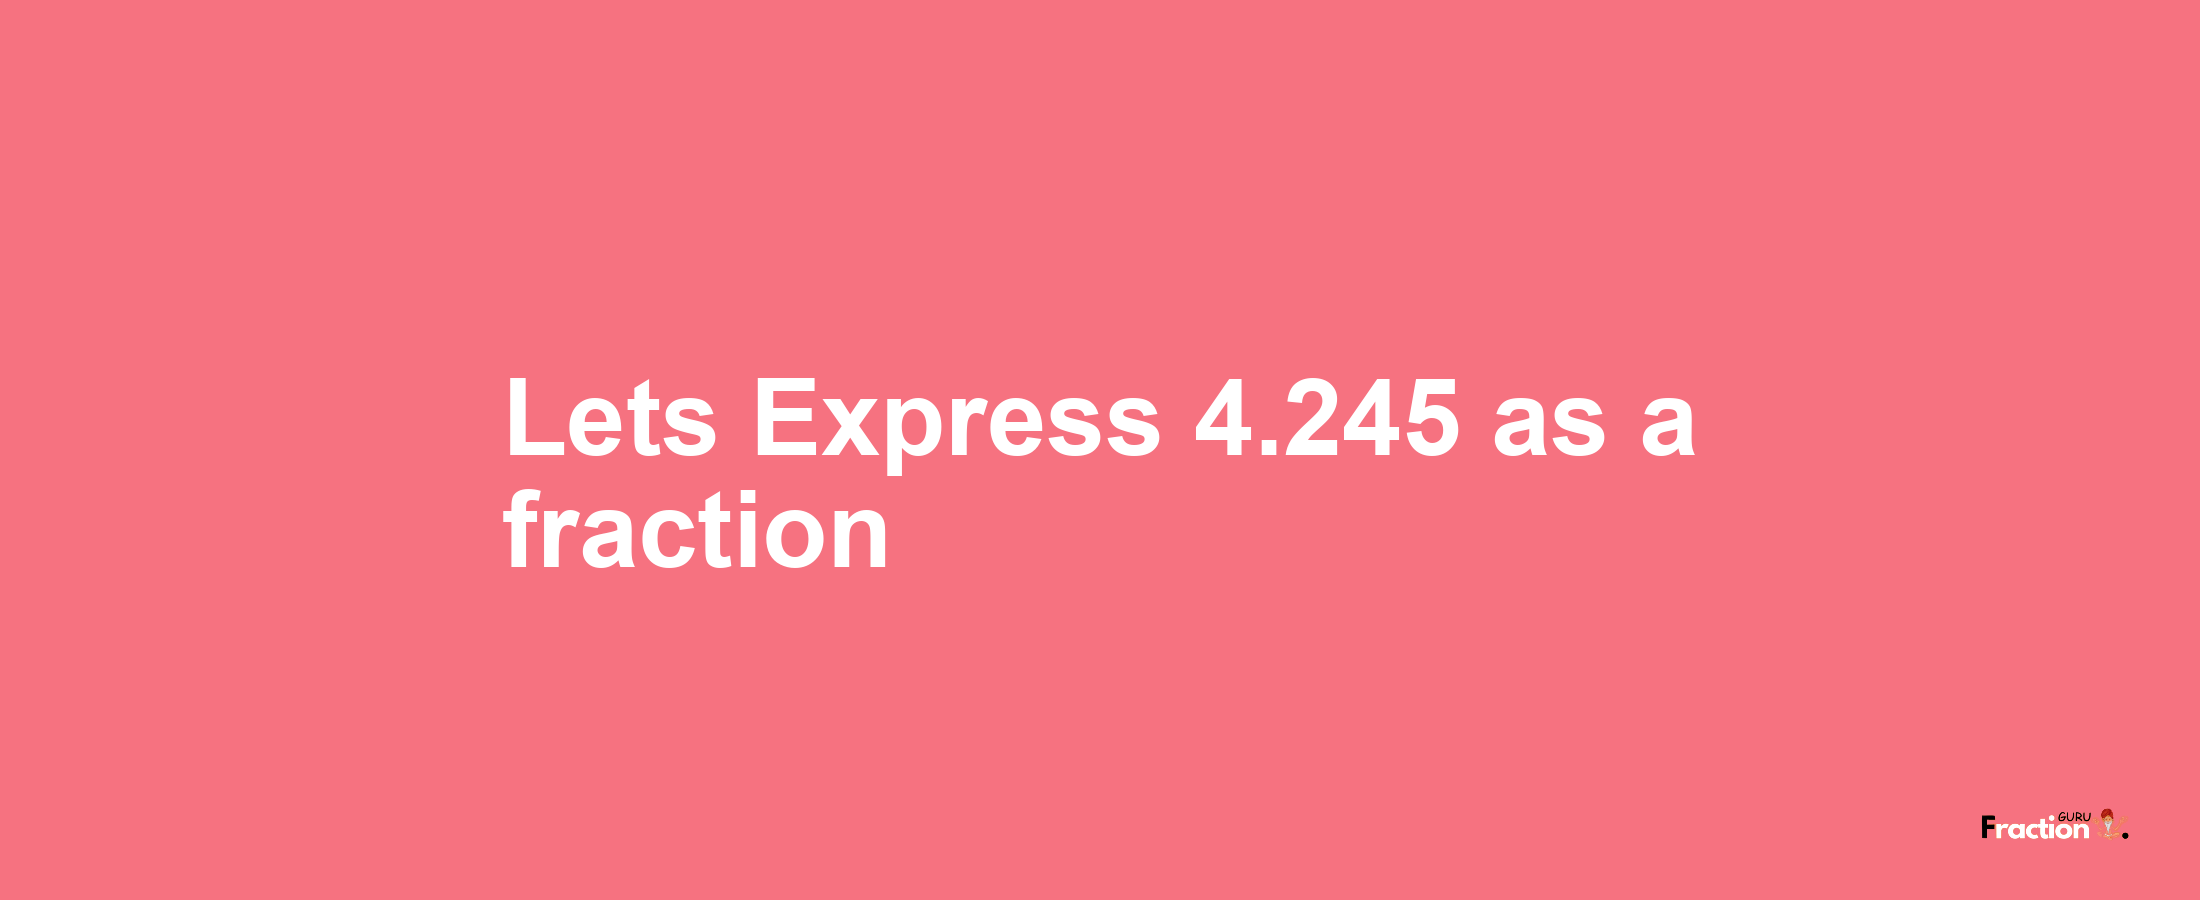 Lets Express 4.245 as afraction